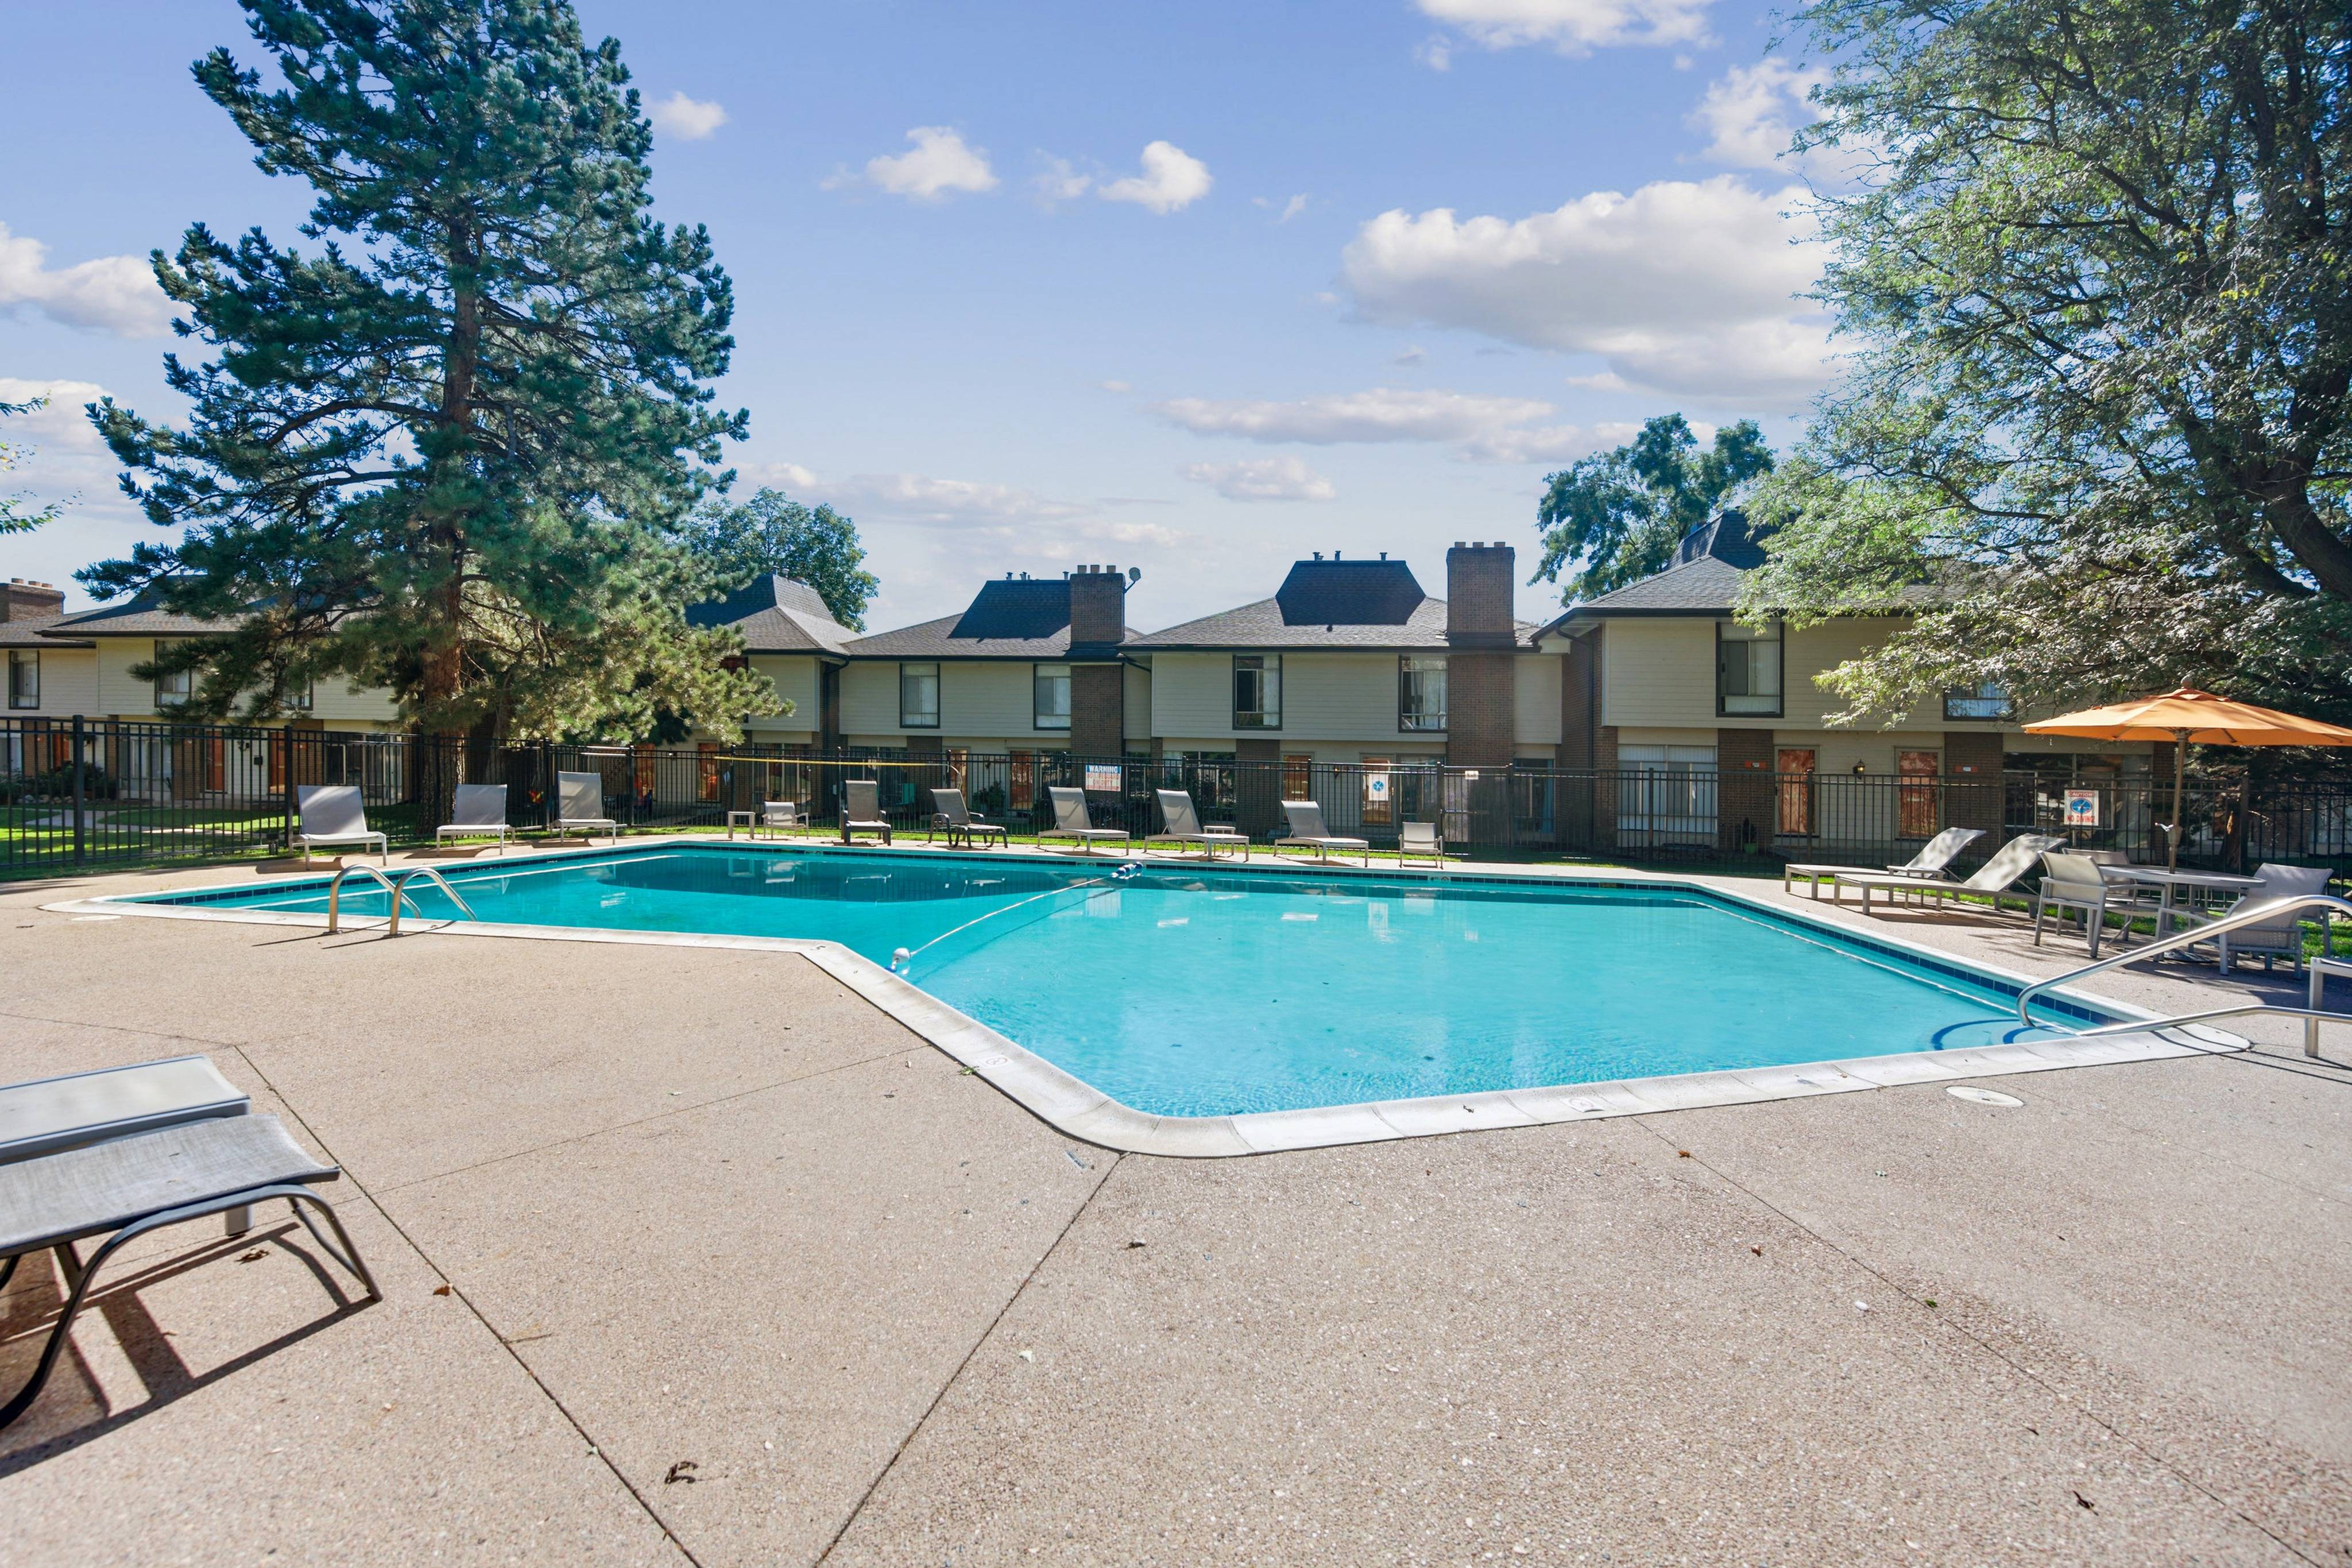 Outdoor pool near townhomes